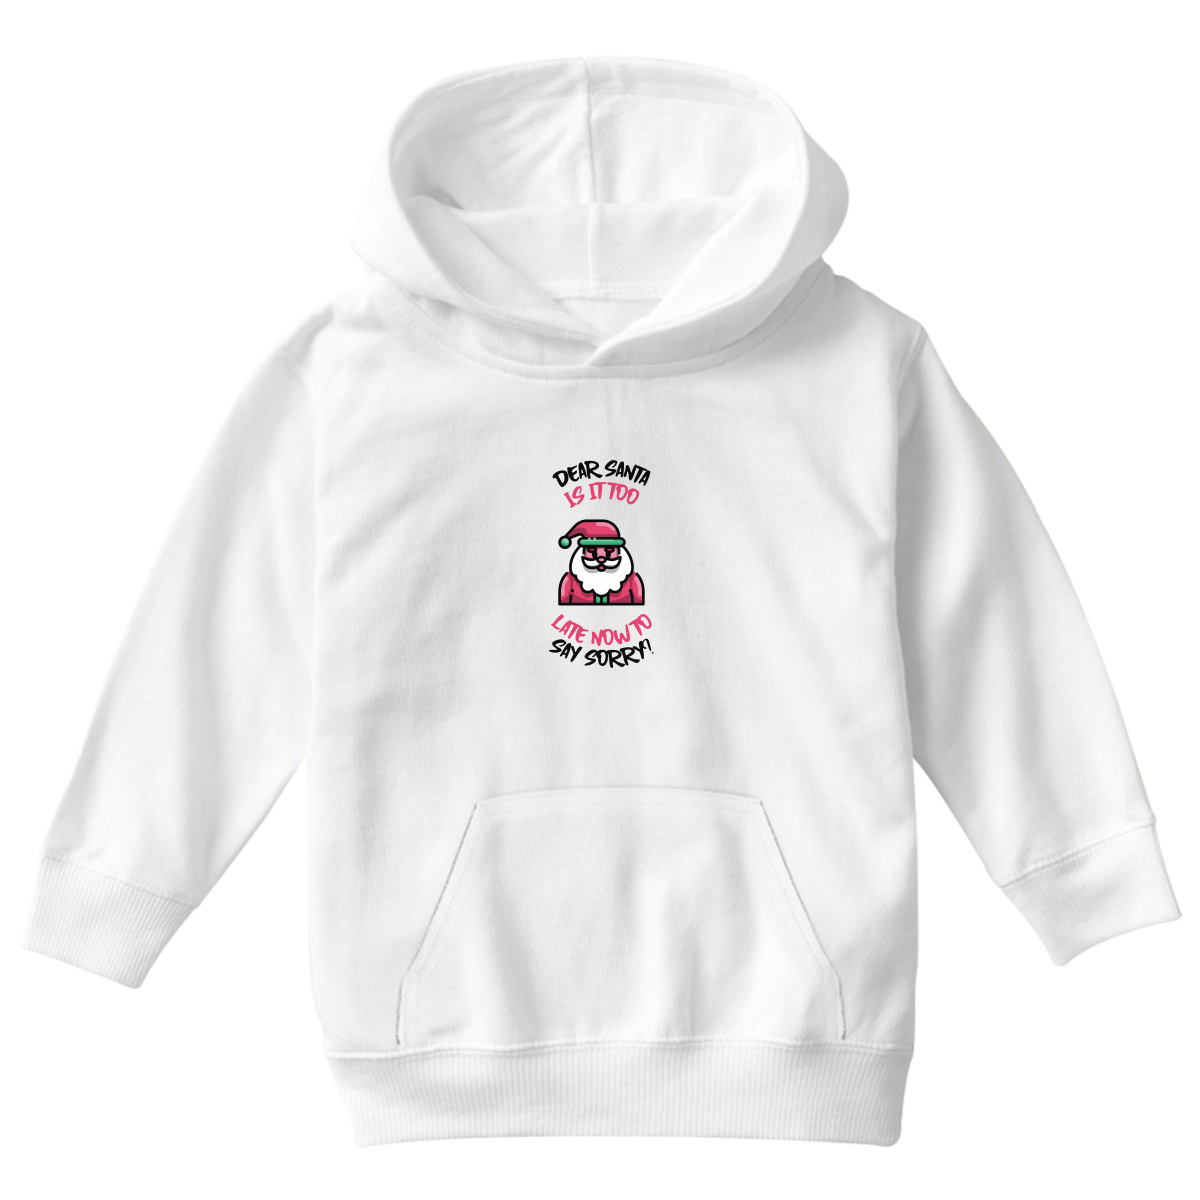 Dear Santa, Is It Too Late to Say Sorry? Kids Hoodie | White